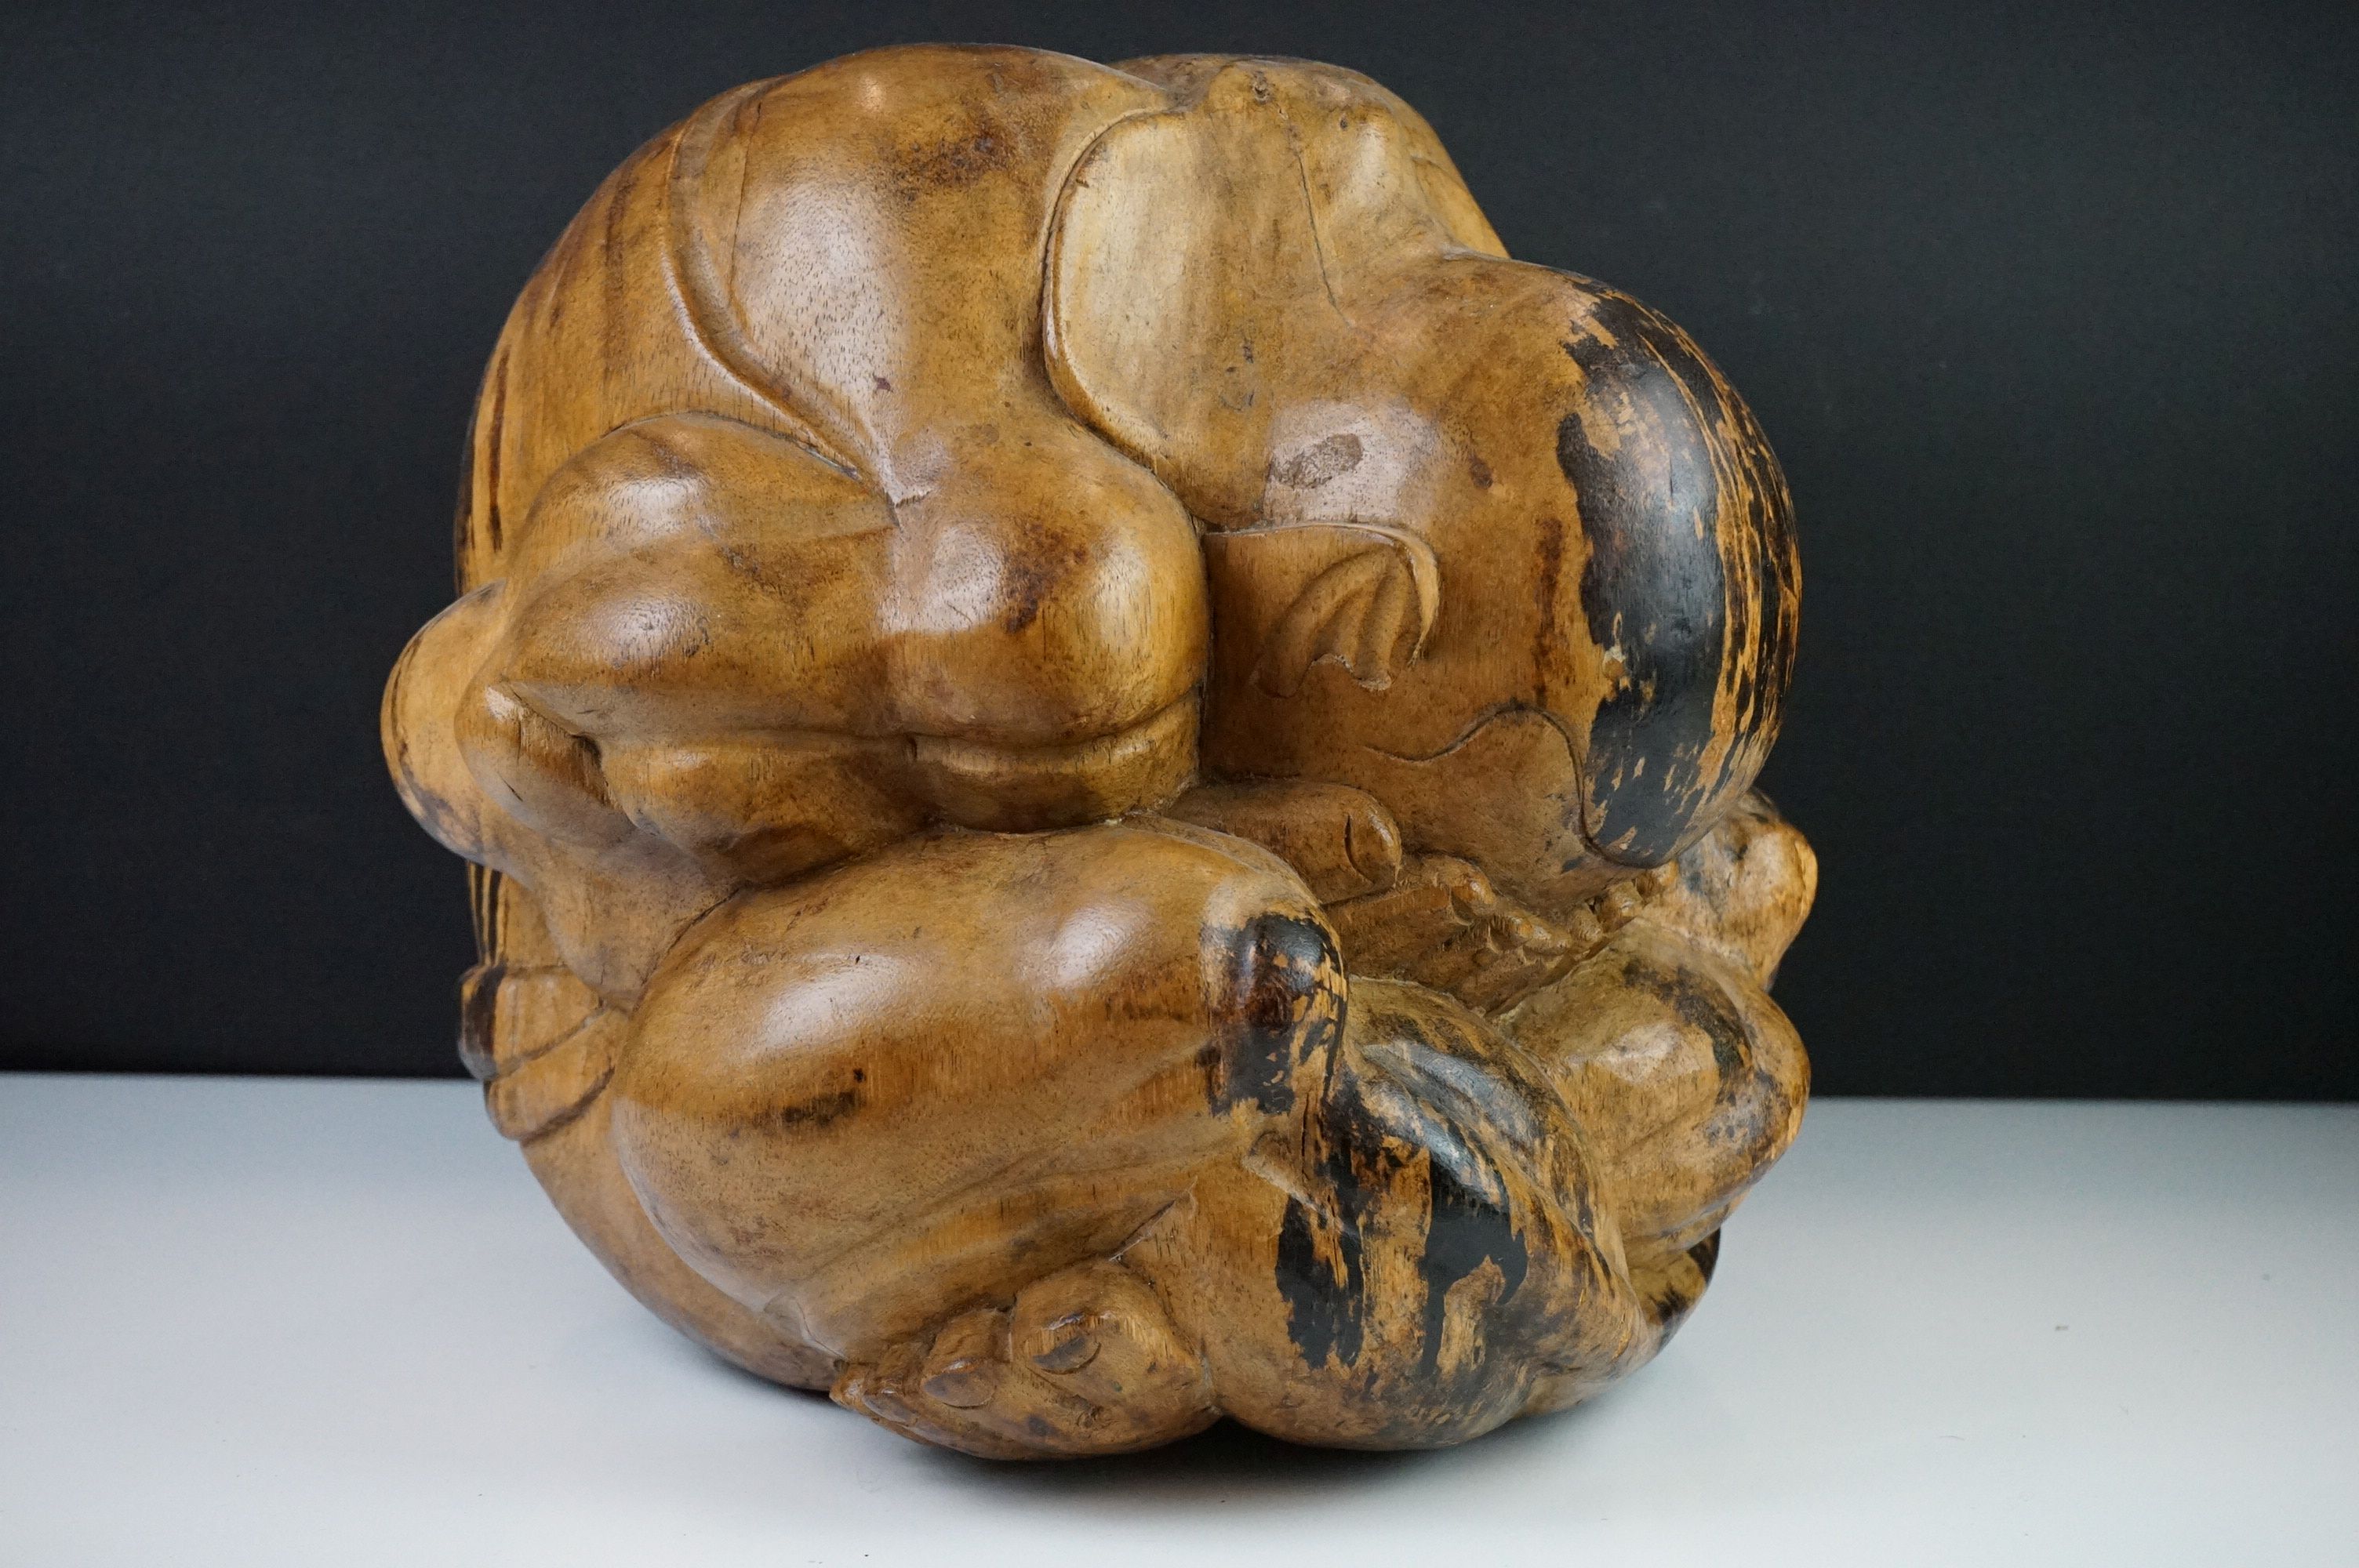 Carved Wooden Sculpture of a Seated Man with his head in his lap, 30cm high x 31cm wide - Image 5 of 8